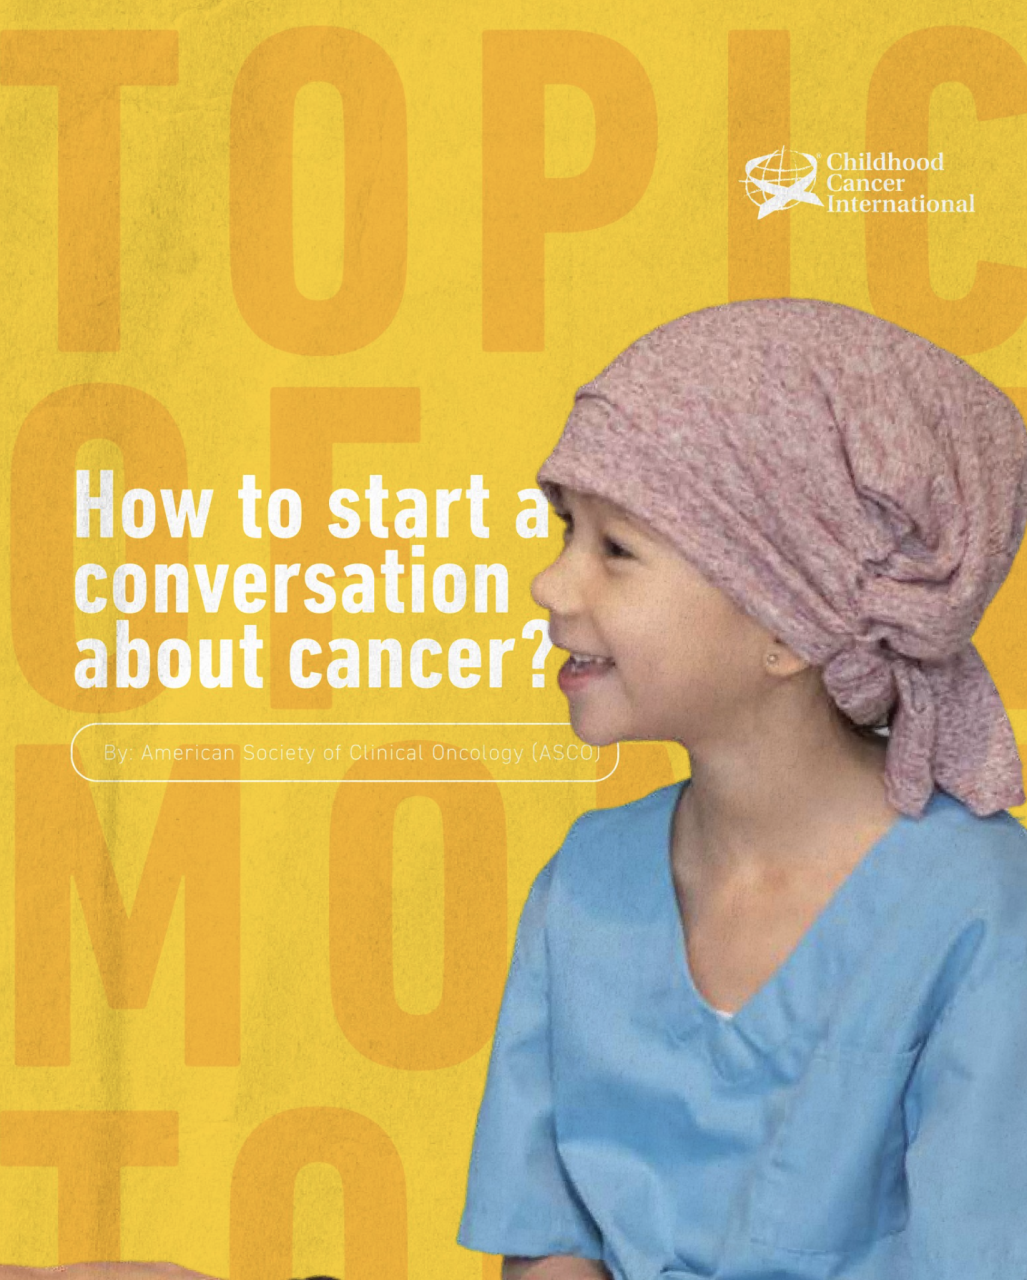 We invite you to take the lead and show your support with these tips for starting a conversation about cancer. – Childhood Cancer International